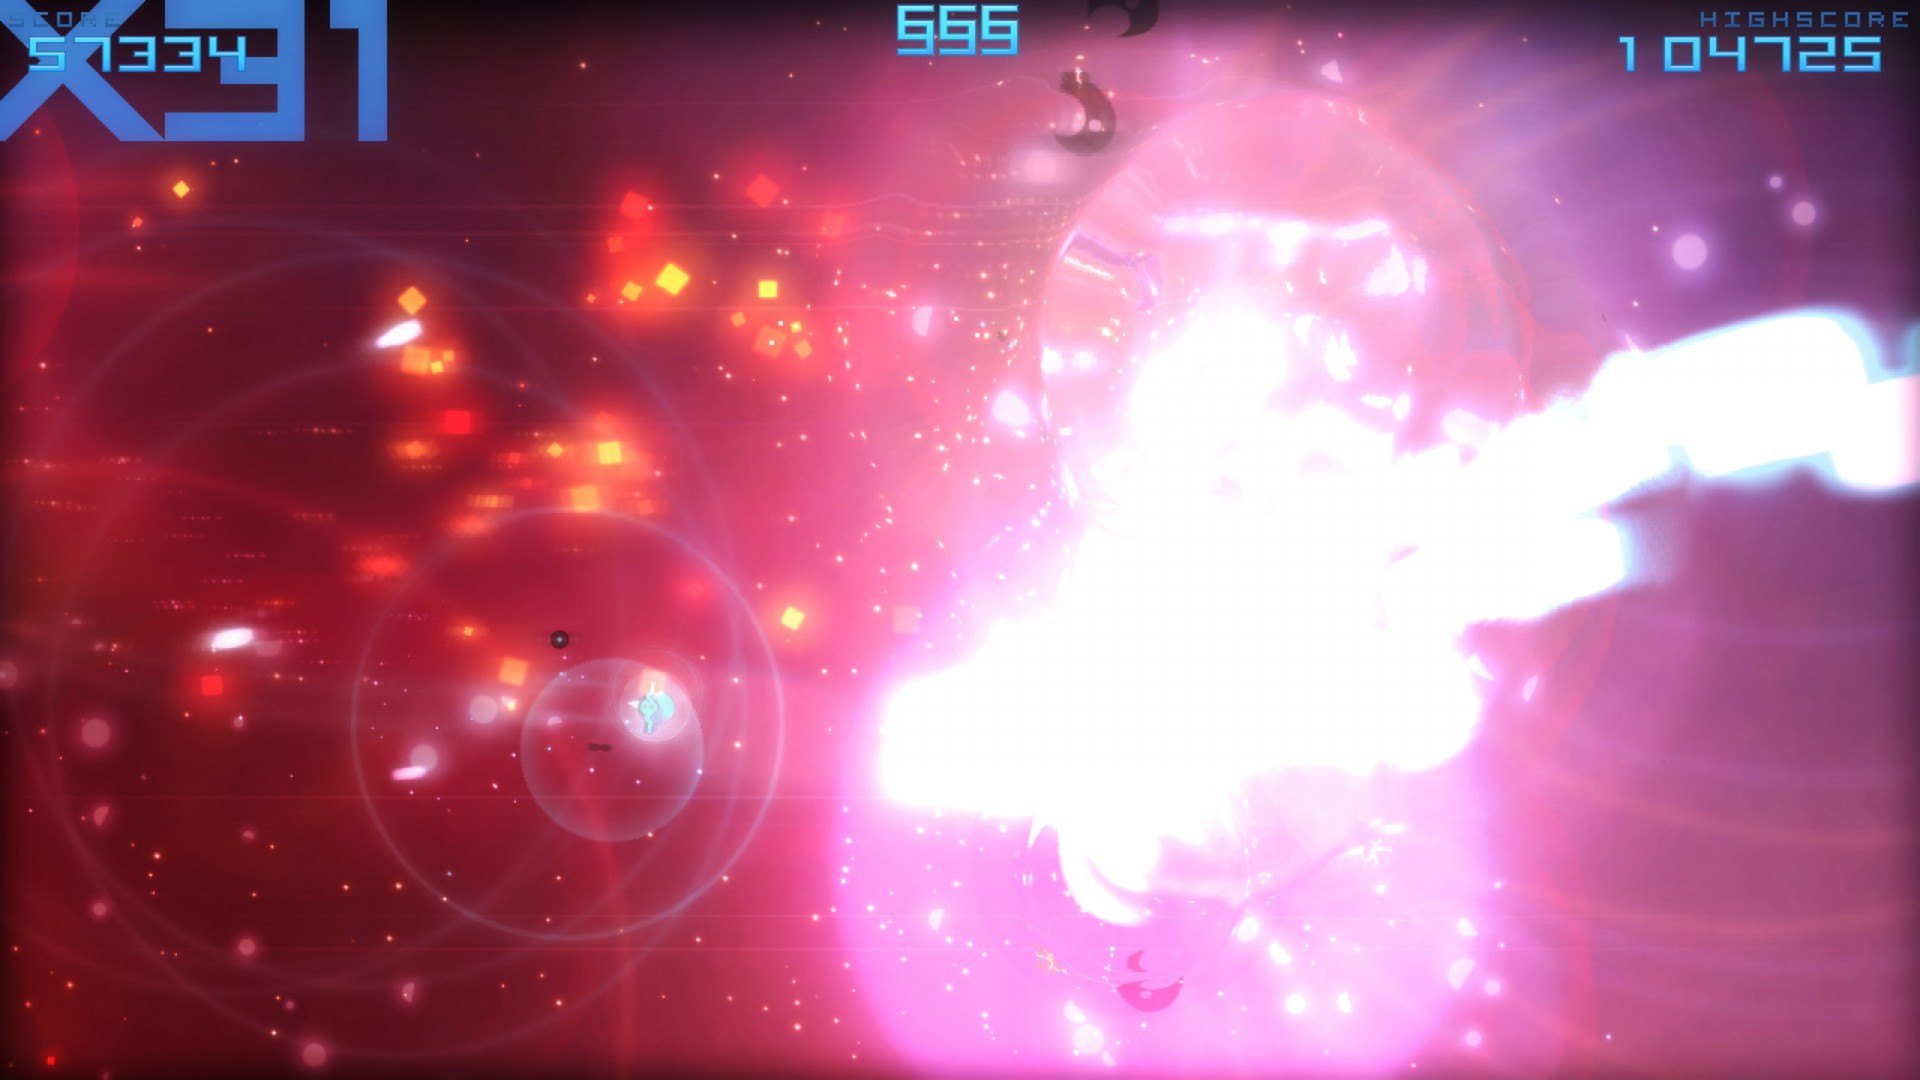 The developer of Really Big Sky, Boss Baddie, is from the UK, sure. But their game looks like fireworks, so America!